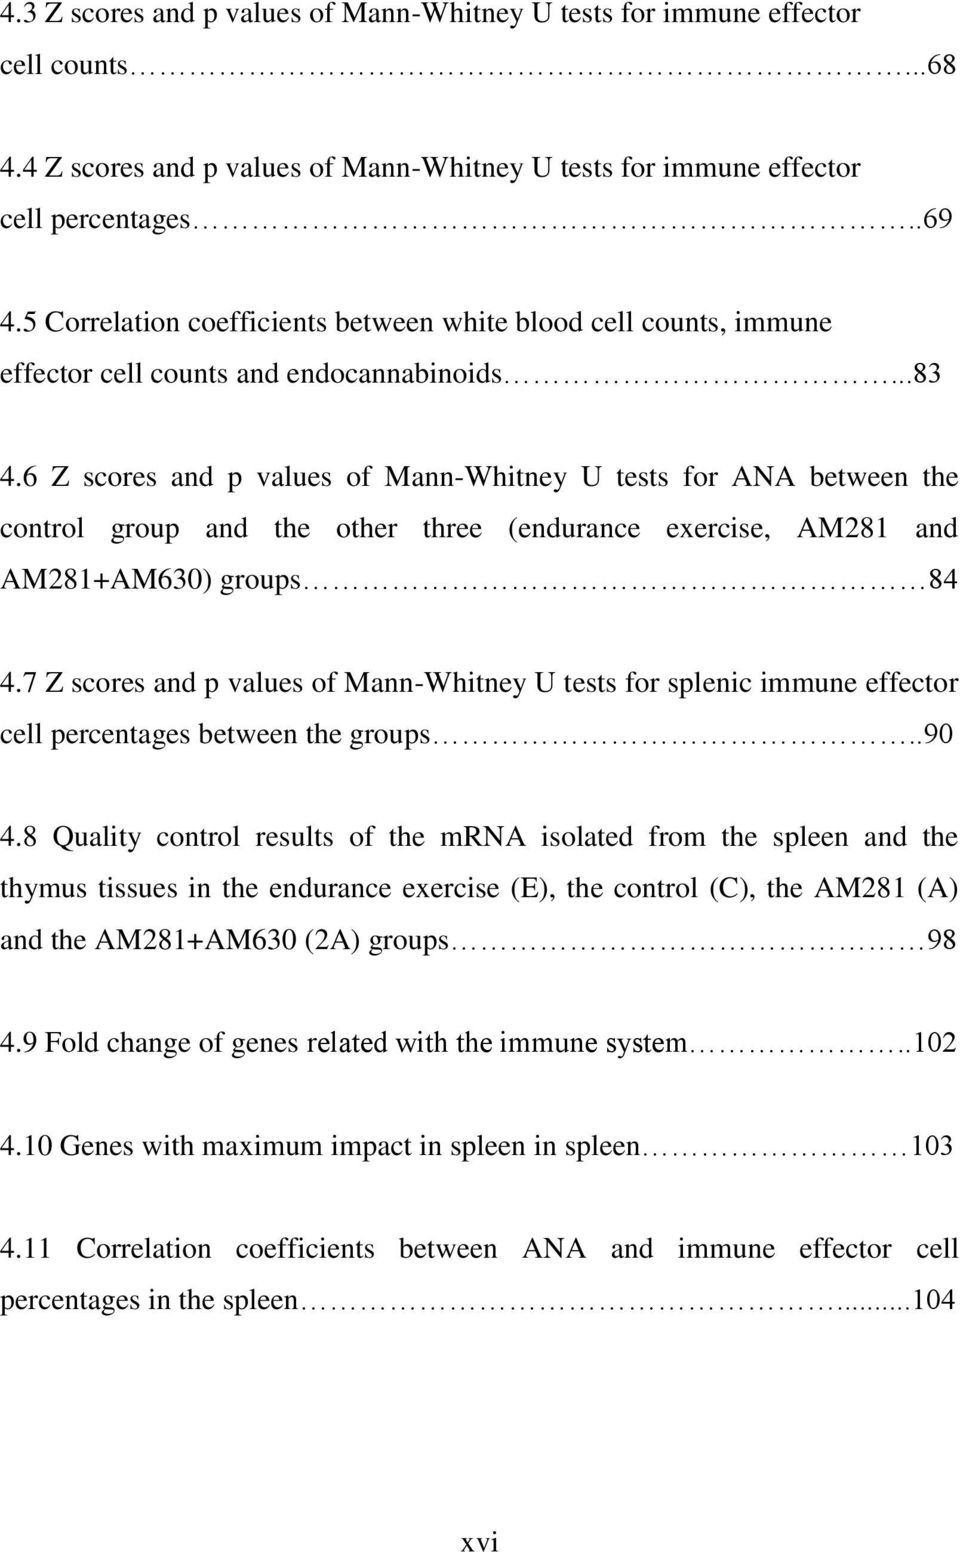 6 Z scores and p values of Mann-Whitney U tests for ANA between the control group and the other three (endurance exercise, AM281 and AM281+AM630) groups 84 4.